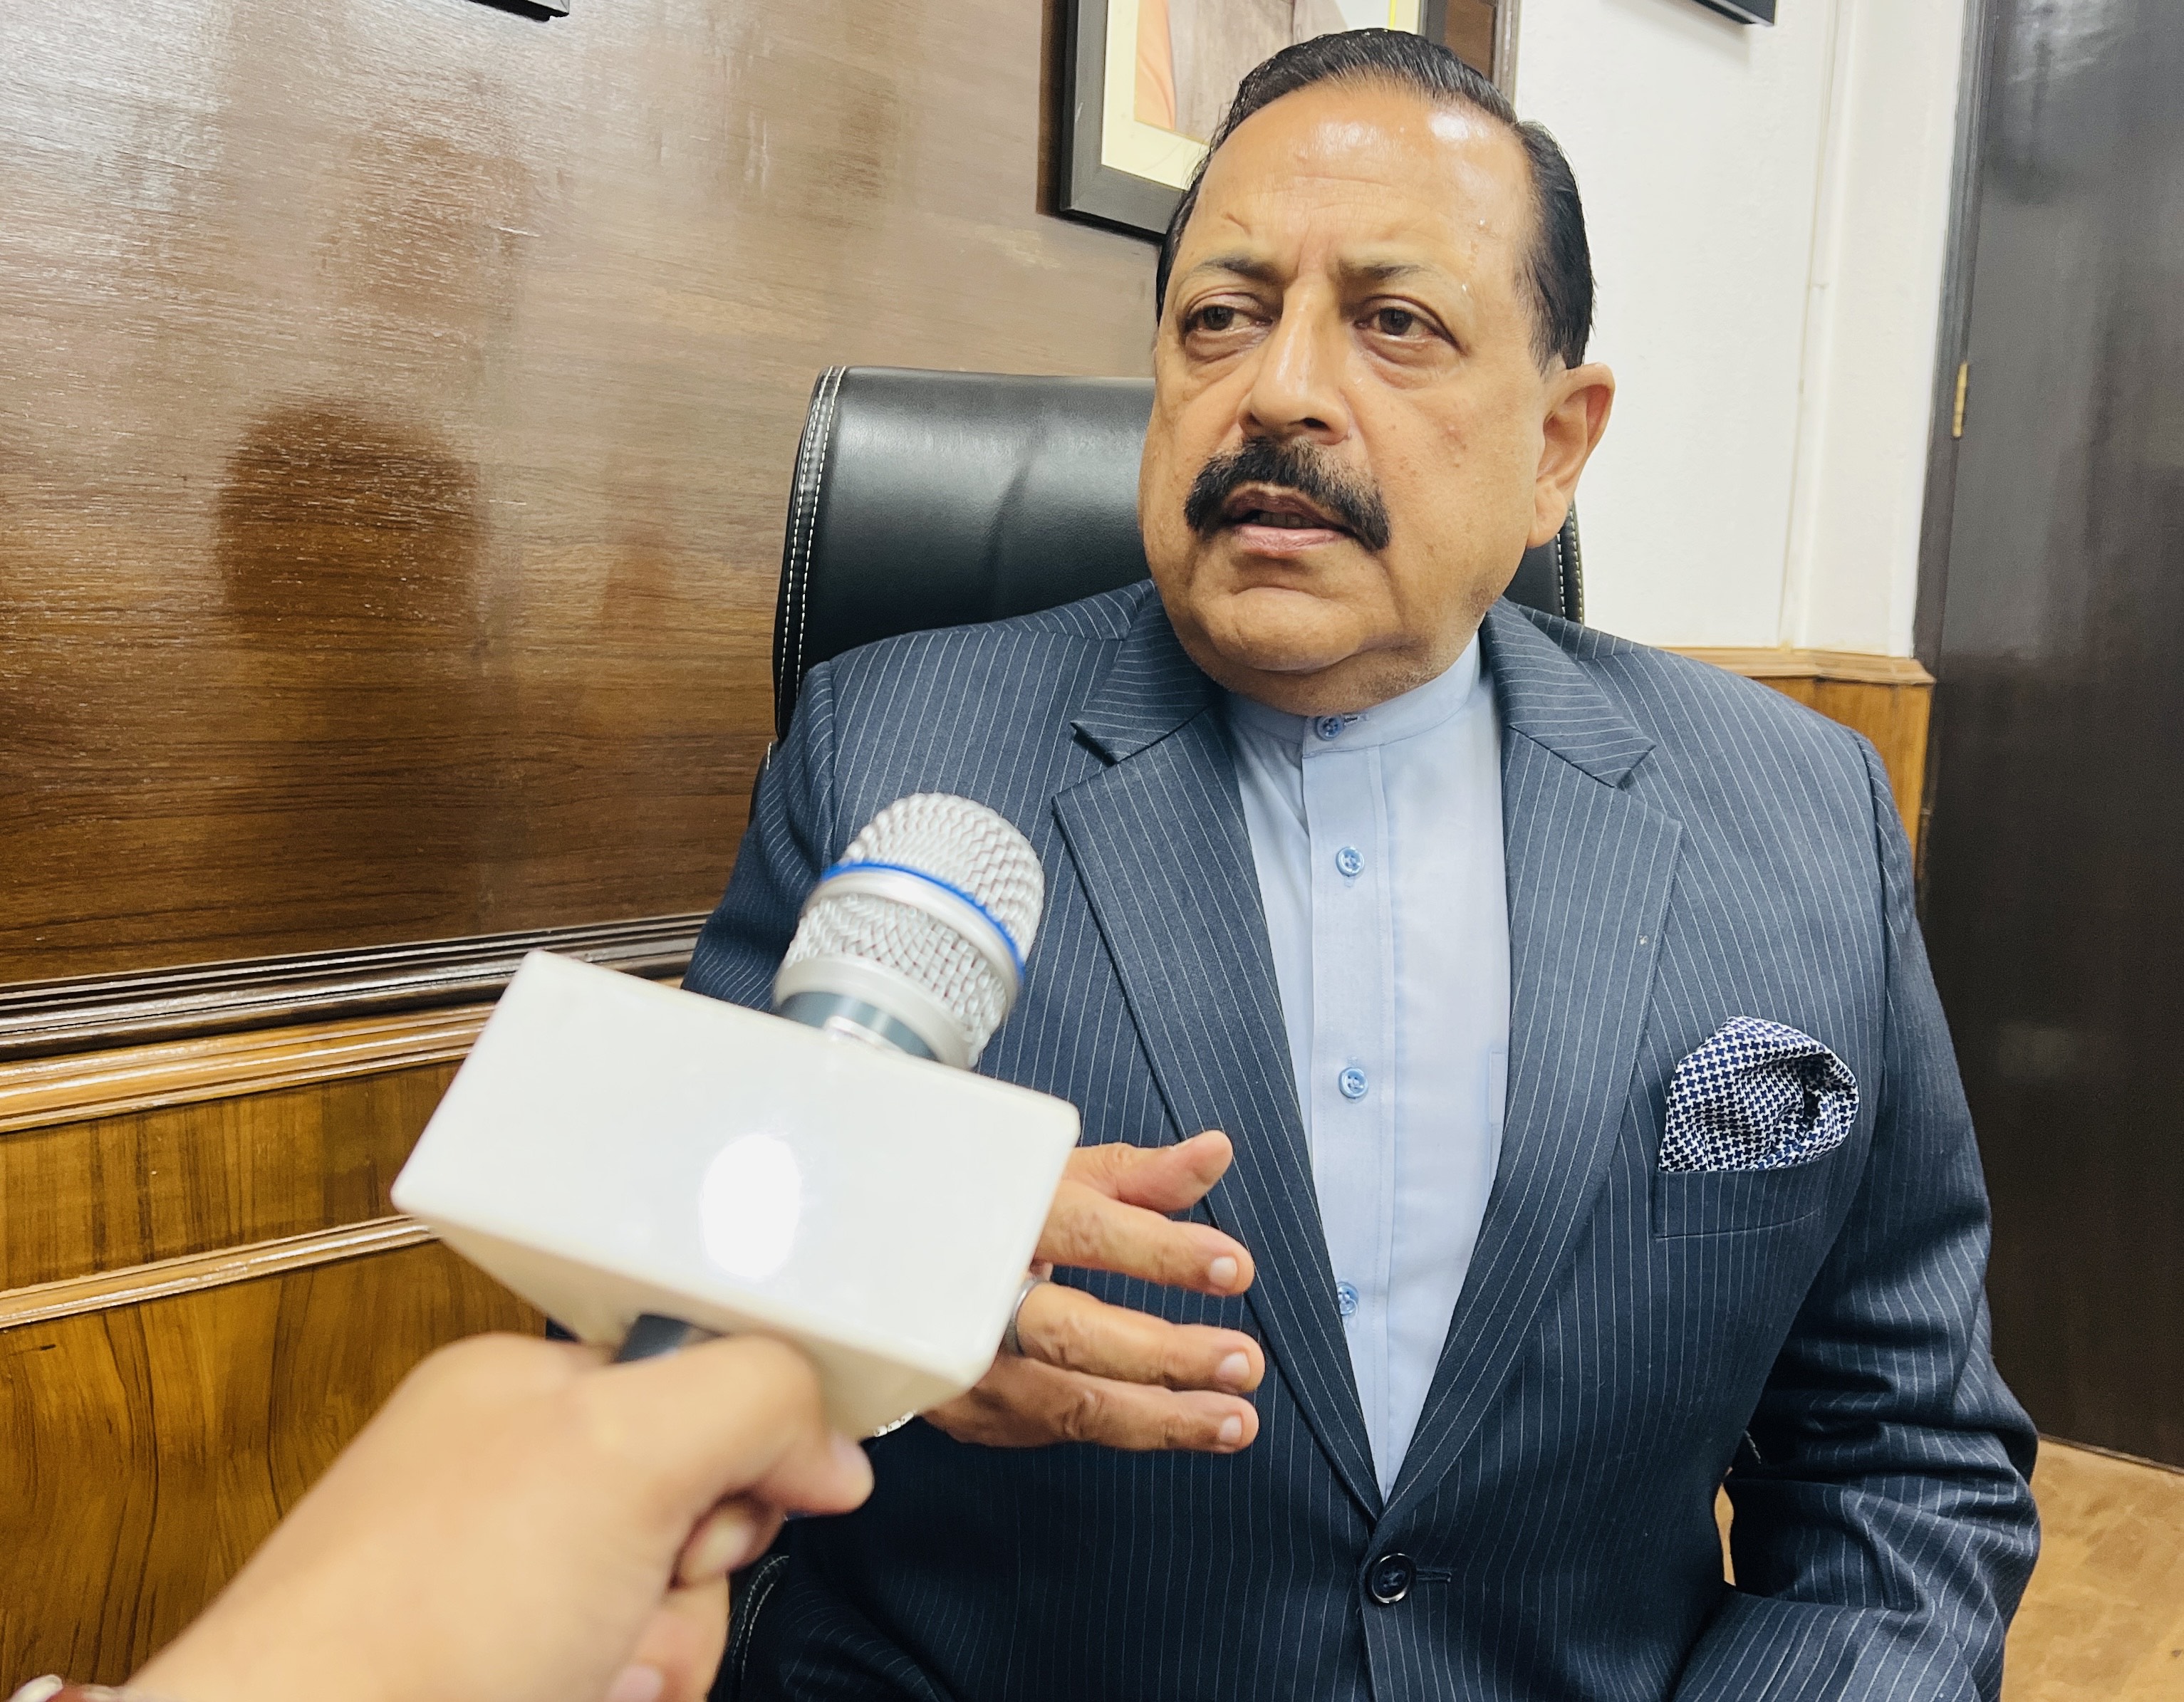 Nearly 13,000 remote area patients have been attended so far in the far-flung regions of Udhampur-Kathua-Doda Lok Sabha constituency by “Doctor on Wheels”: Dr Jitendra Singh